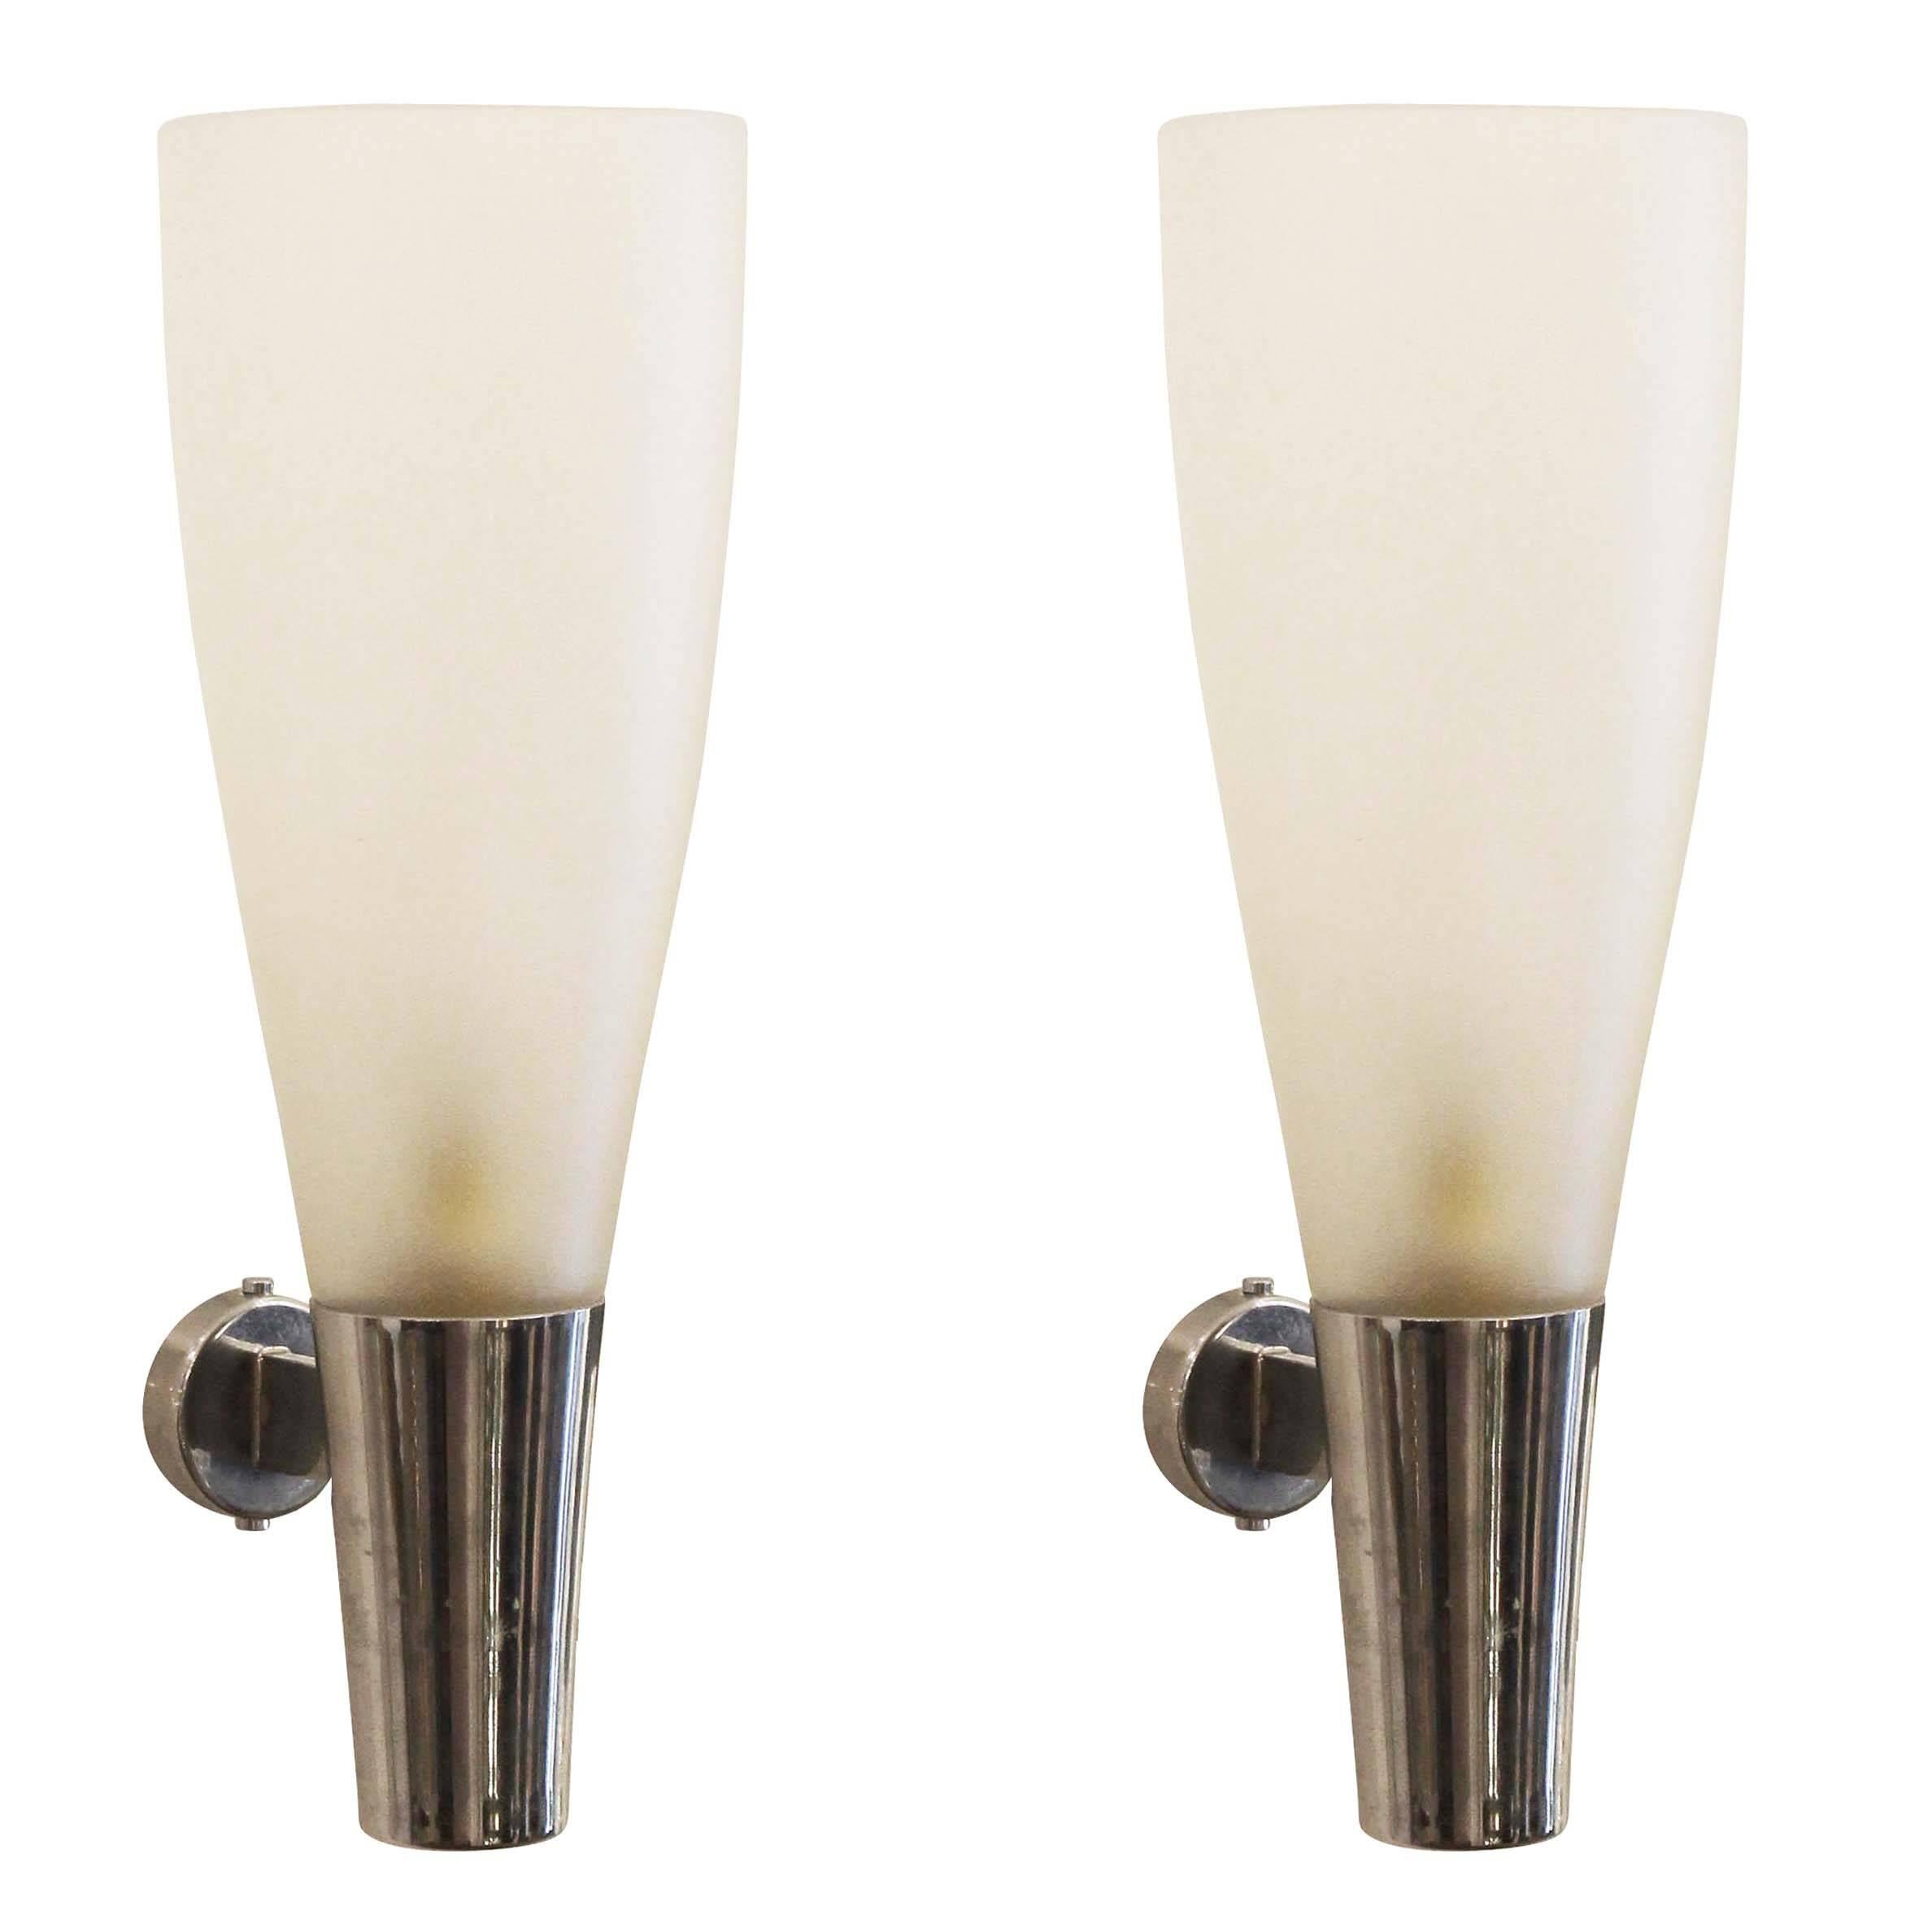 Classic pair of sconces designed by Pietro Chiesa for Fontana Arte in the late 1930s and attributed by some to Gio Ponti. They feature an iridescent frosted glass of superior quality on a chrome base. Both Pietro Chiesa and Gio Ponti designed for